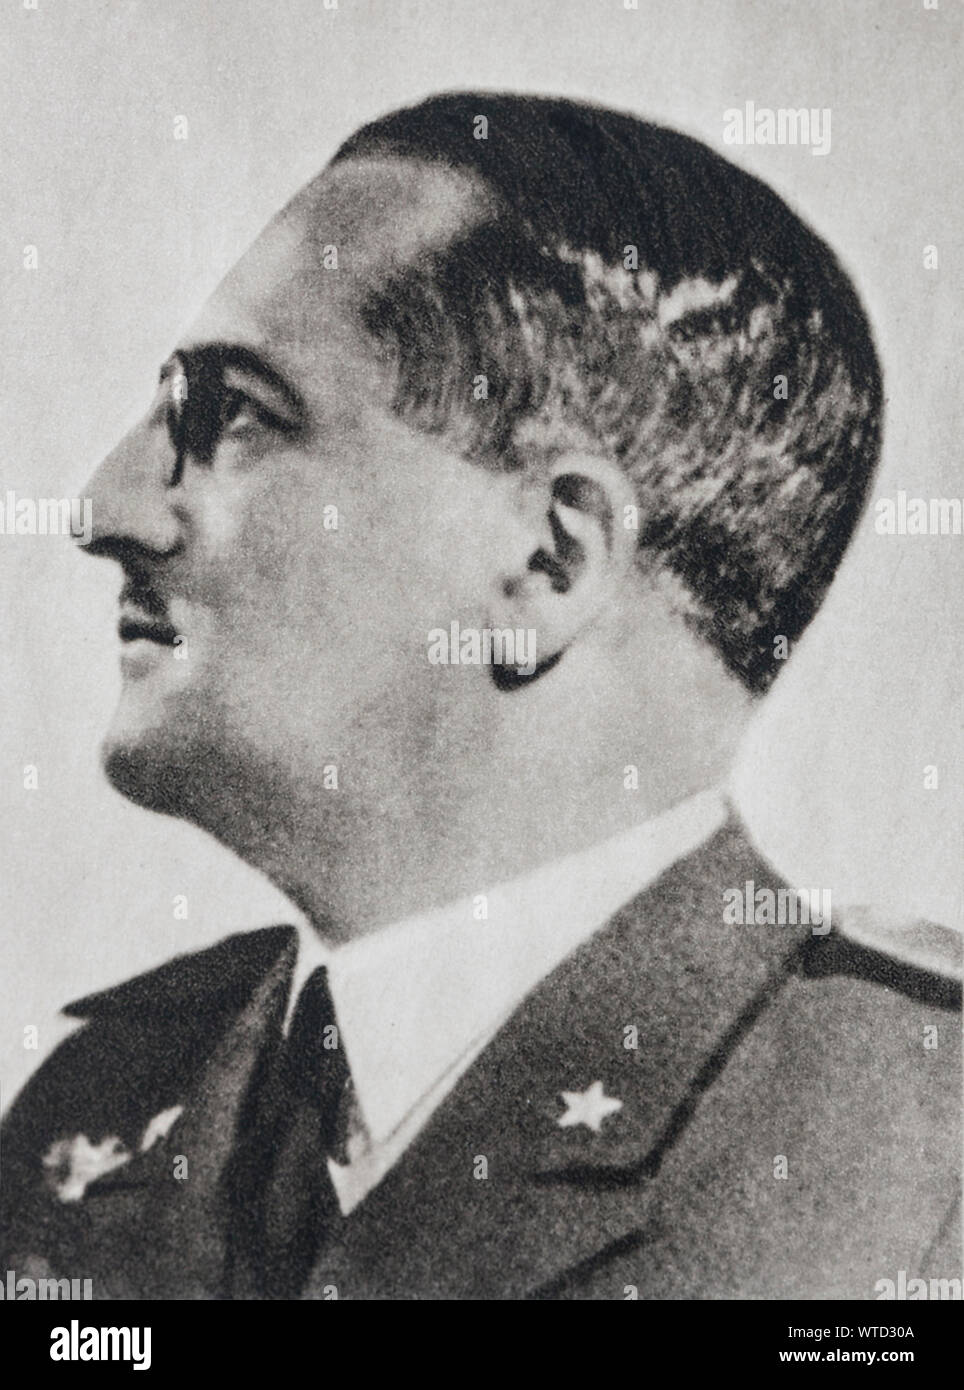 General Ugo Cavallero (1880 – 1943) was an Italian military commander before and during World War II. He was a recipient of the Knight's Cross of the Stock Photo